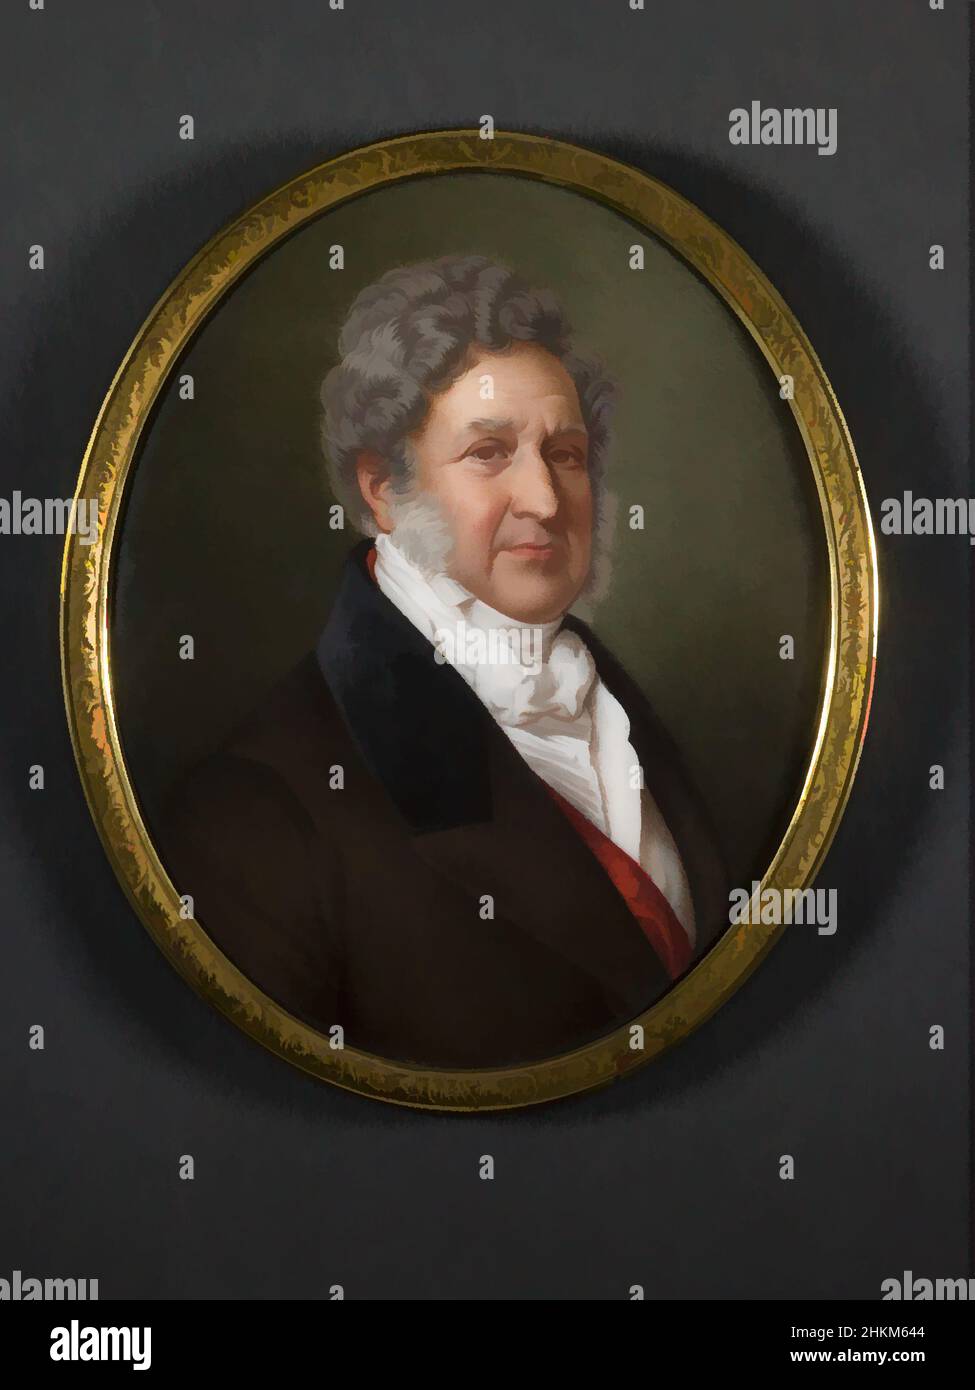 Art inspired by Louis-Philippe, Duc d'Orléans, King of France, Sophie Lienard, French, active 1842-1845, mid-19th century, Enamel on porcelain, Made in France, Europe, Miniature paintings, paintings, image (by sight): 5 1/16 x 4 1/16 in. (12.9 x 10.3 cm, Classic works modernized by Artotop with a splash of modernity. Shapes, color and value, eye-catching visual impact on art. Emotions through freedom of artworks in a contemporary way. A timeless message pursuing a wildly creative new direction. Artists turning to the digital medium and creating the Artotop NFT Stock Photo